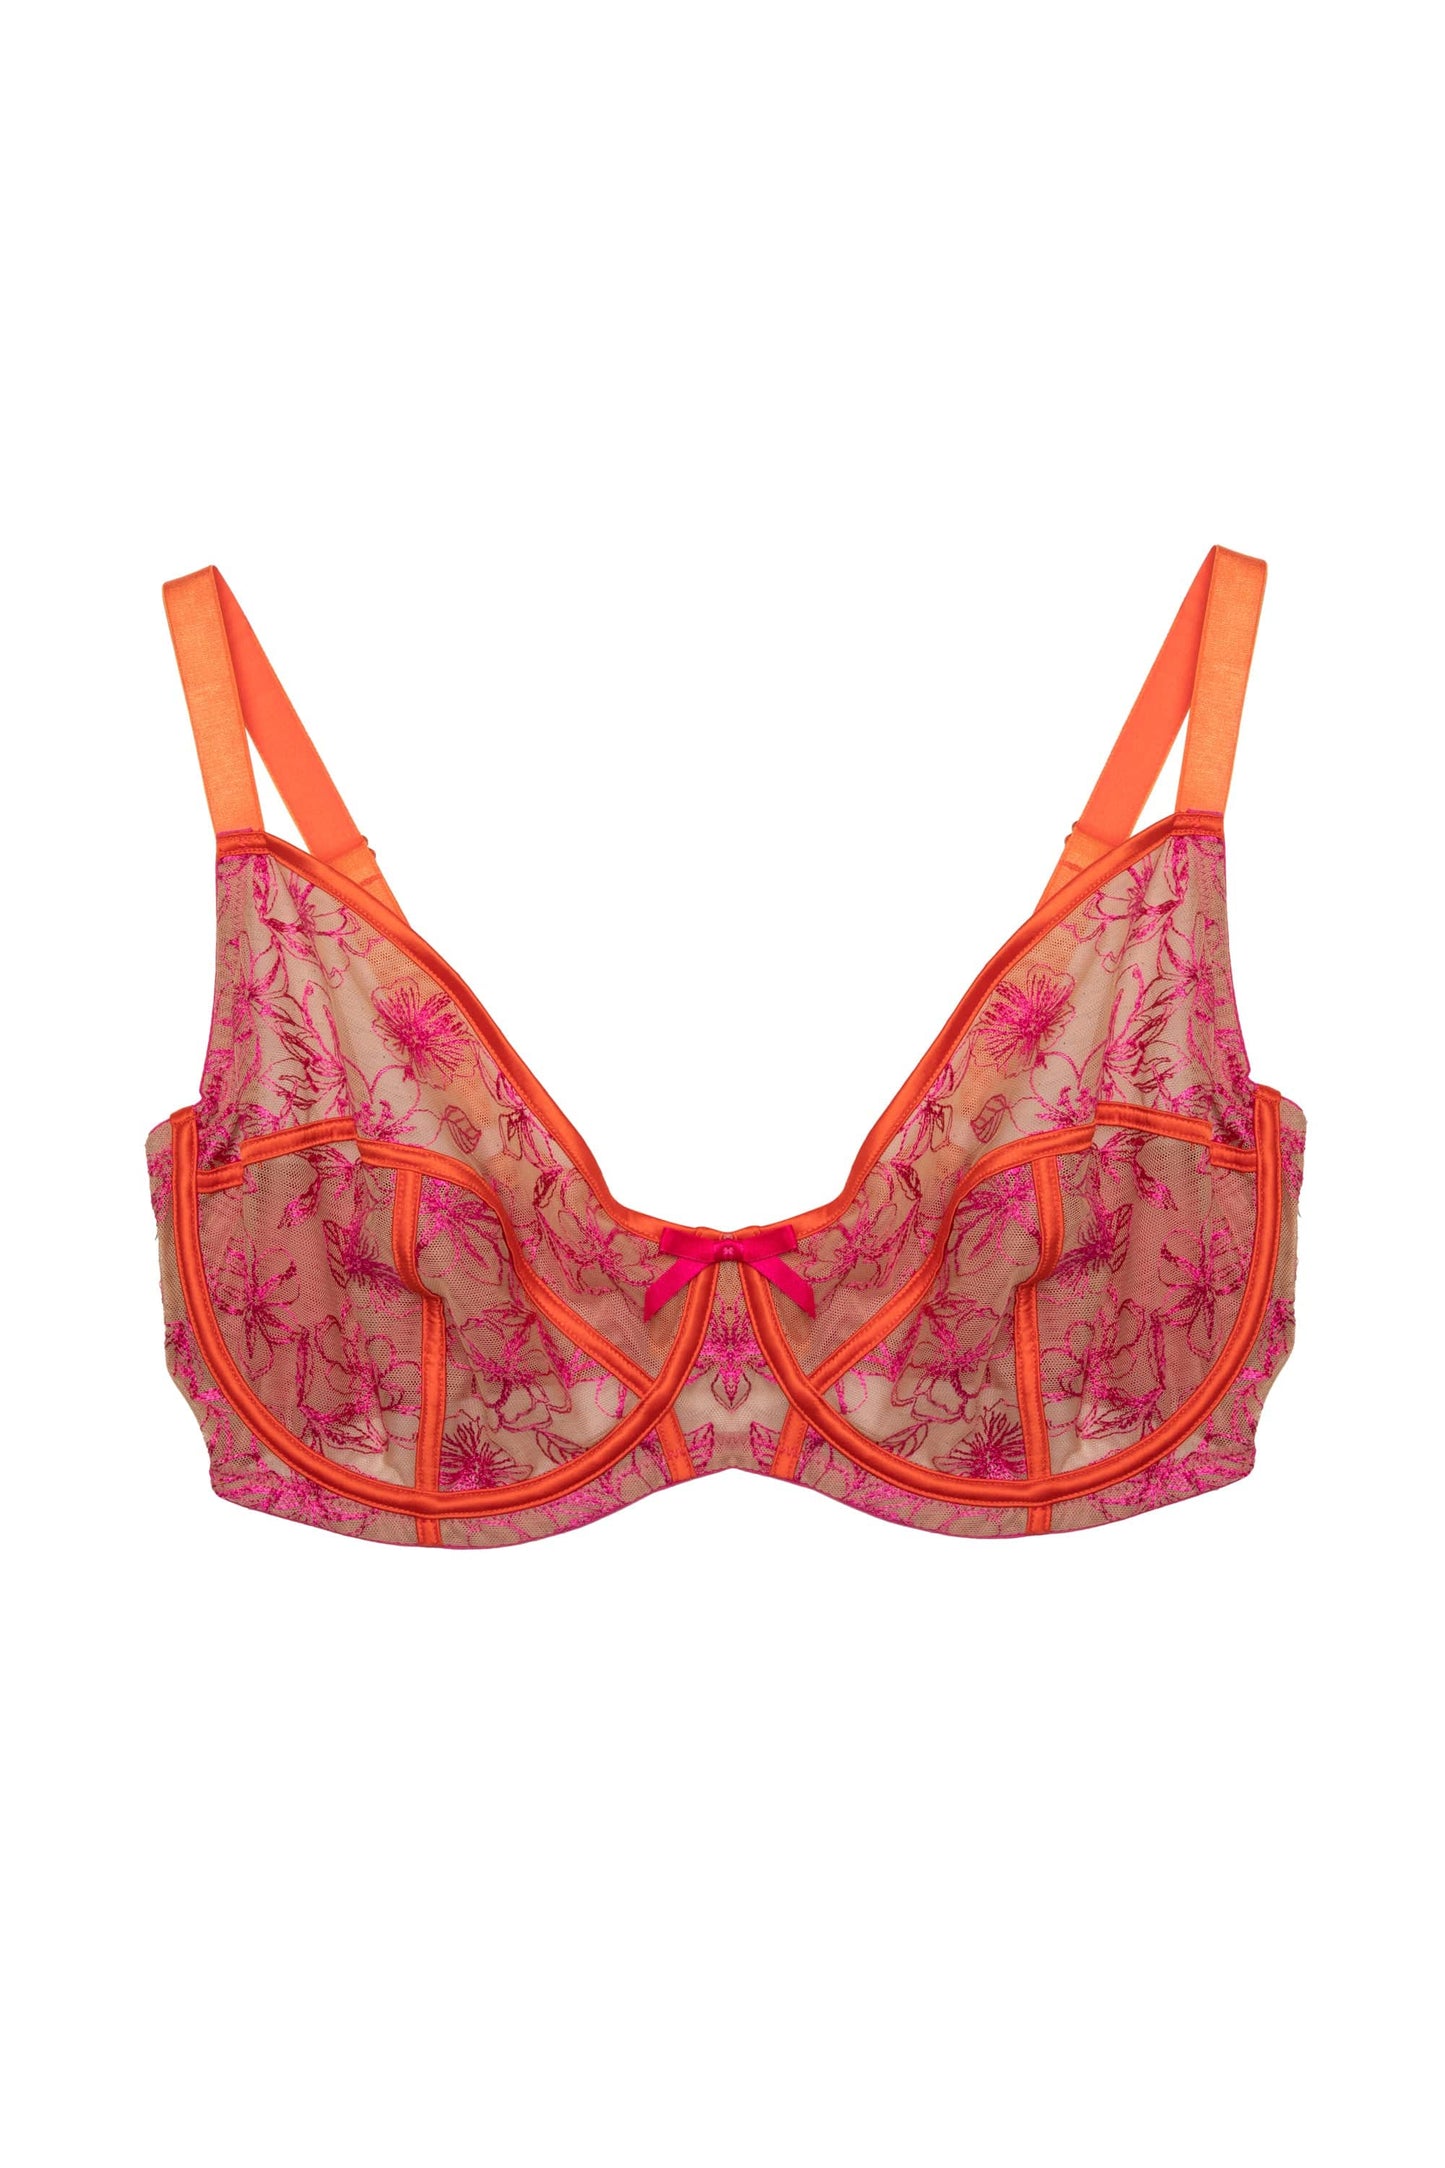 Olivia Pink Embroidery Lingerie - Toronto Lingerie - Playful